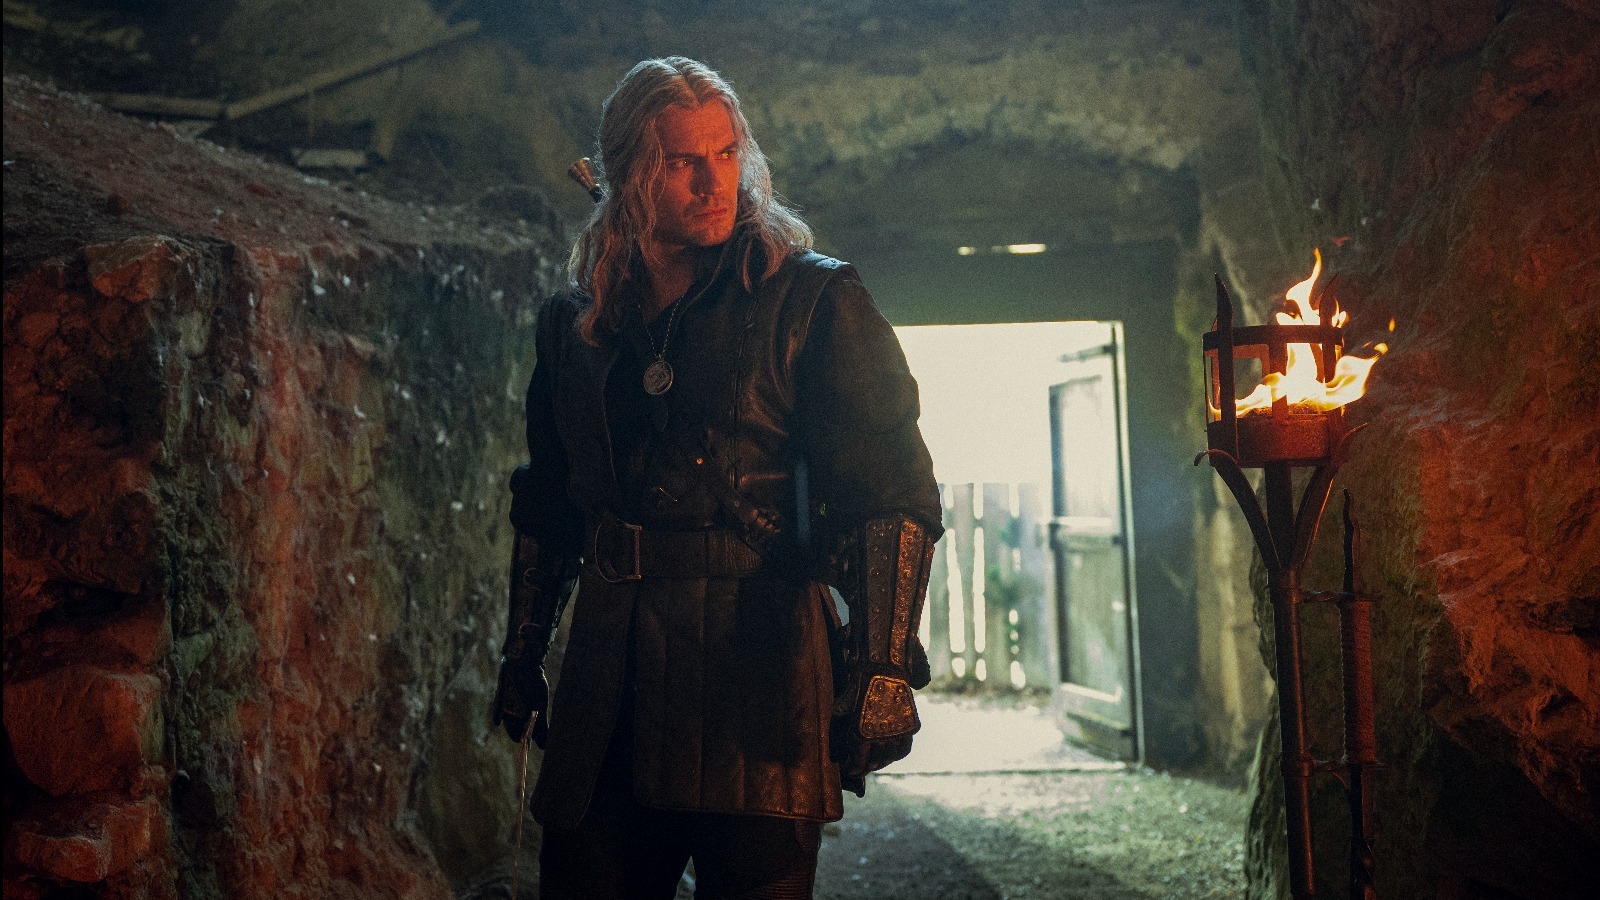 The Witcher on Netflix: A Beginner's Guide to the TV Show, Books, and Games  - TV Guide